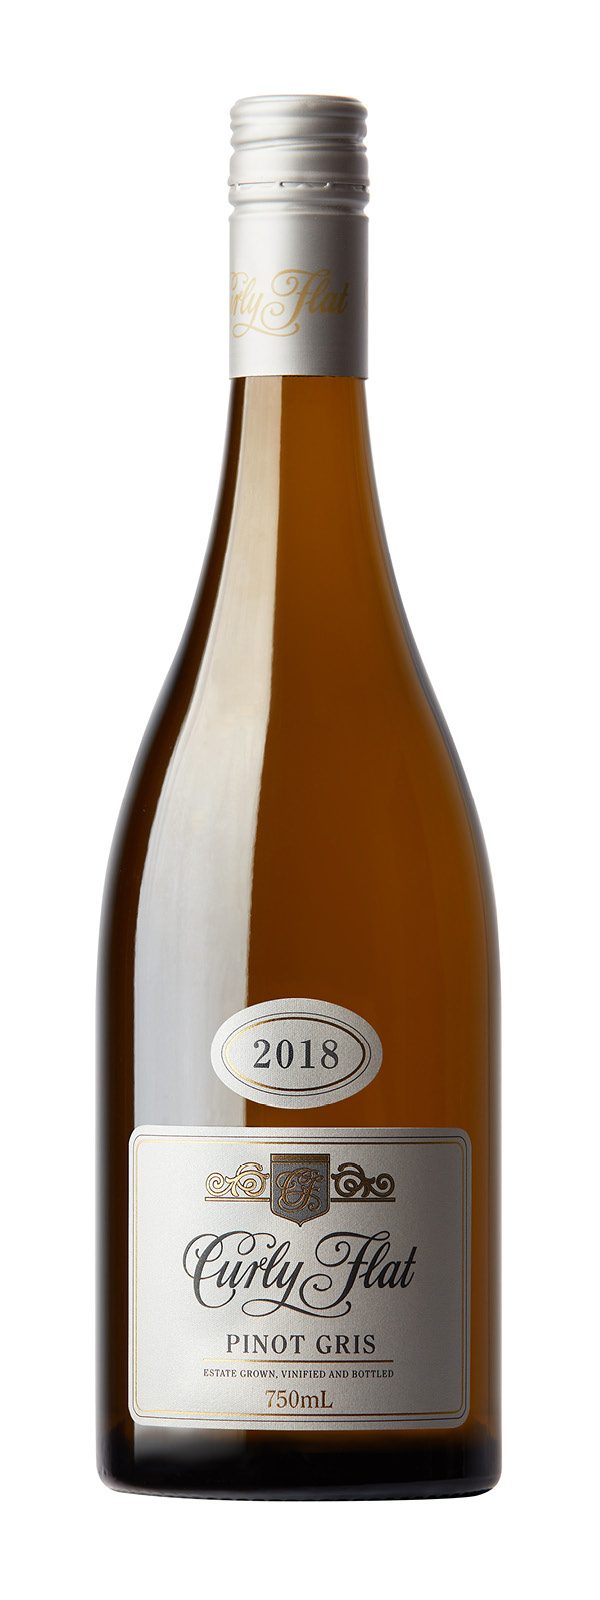 2018 Curly Flat Pinot Gris